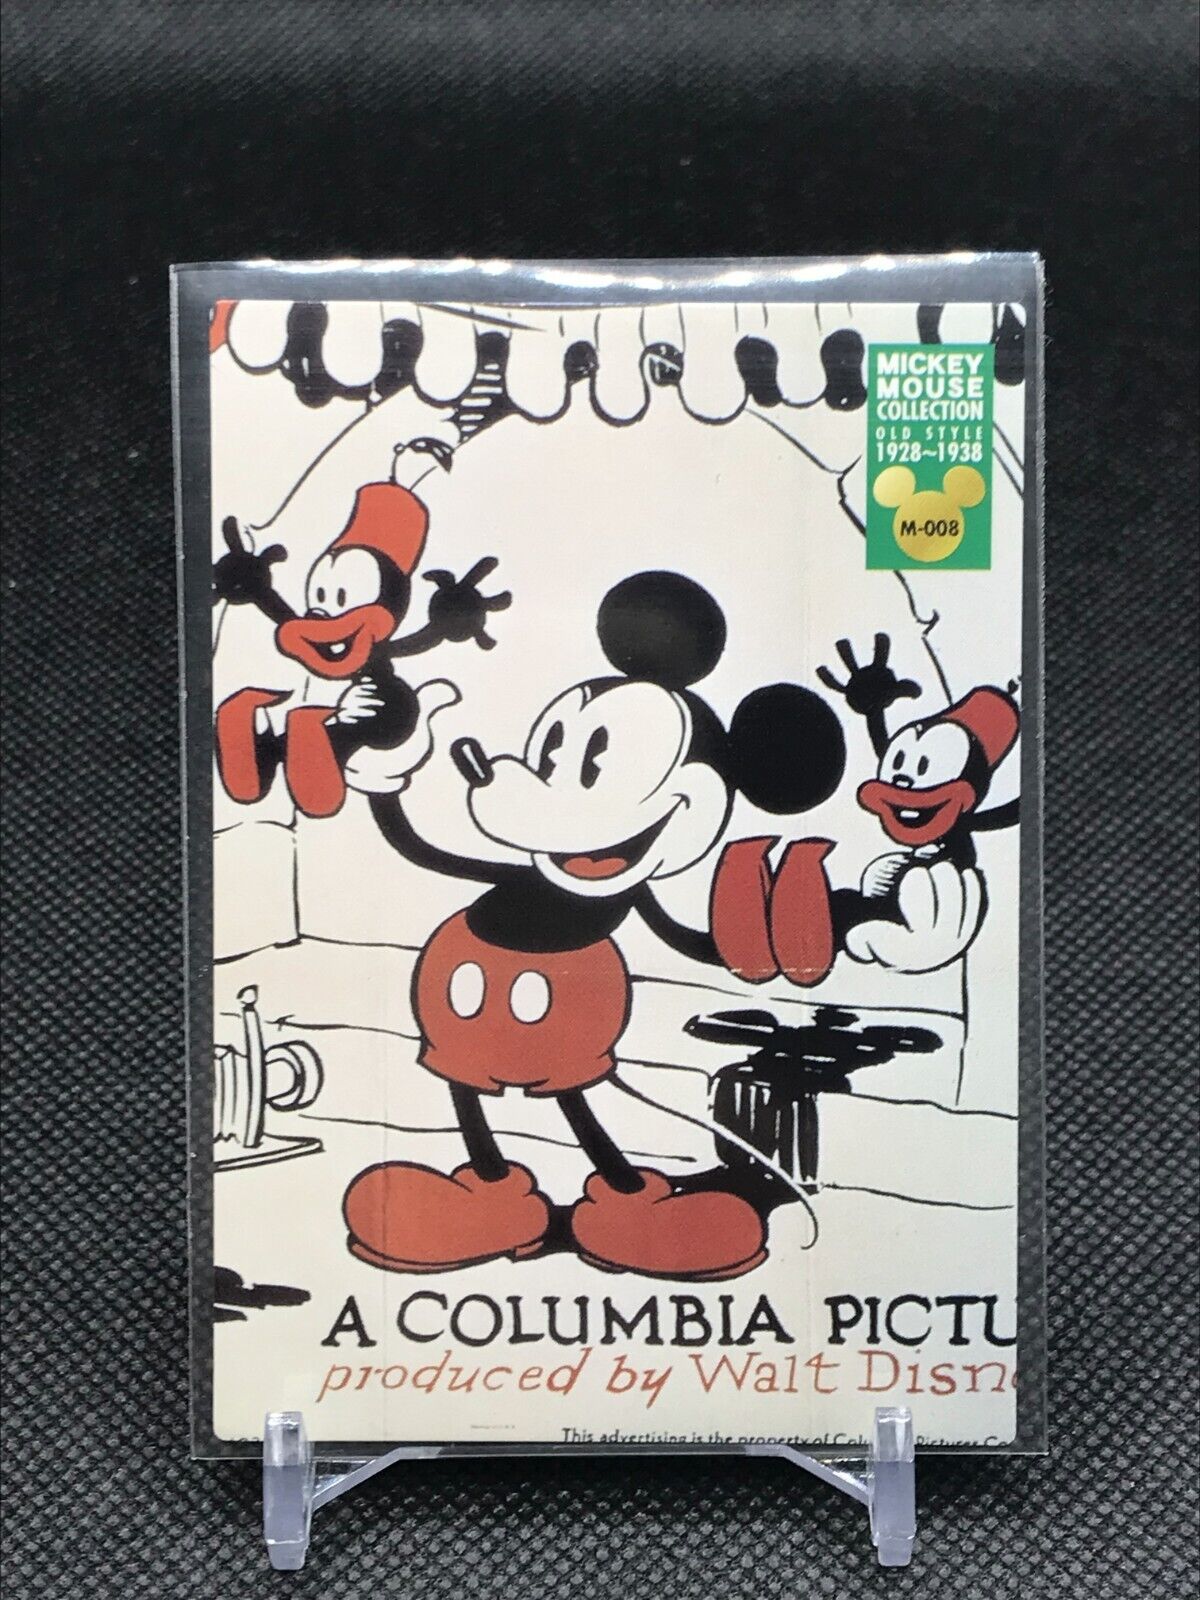 M-008 MICKEY MOUSE COLLECTION OLD STYLE 1928~1938 Made in JAPAN 1999